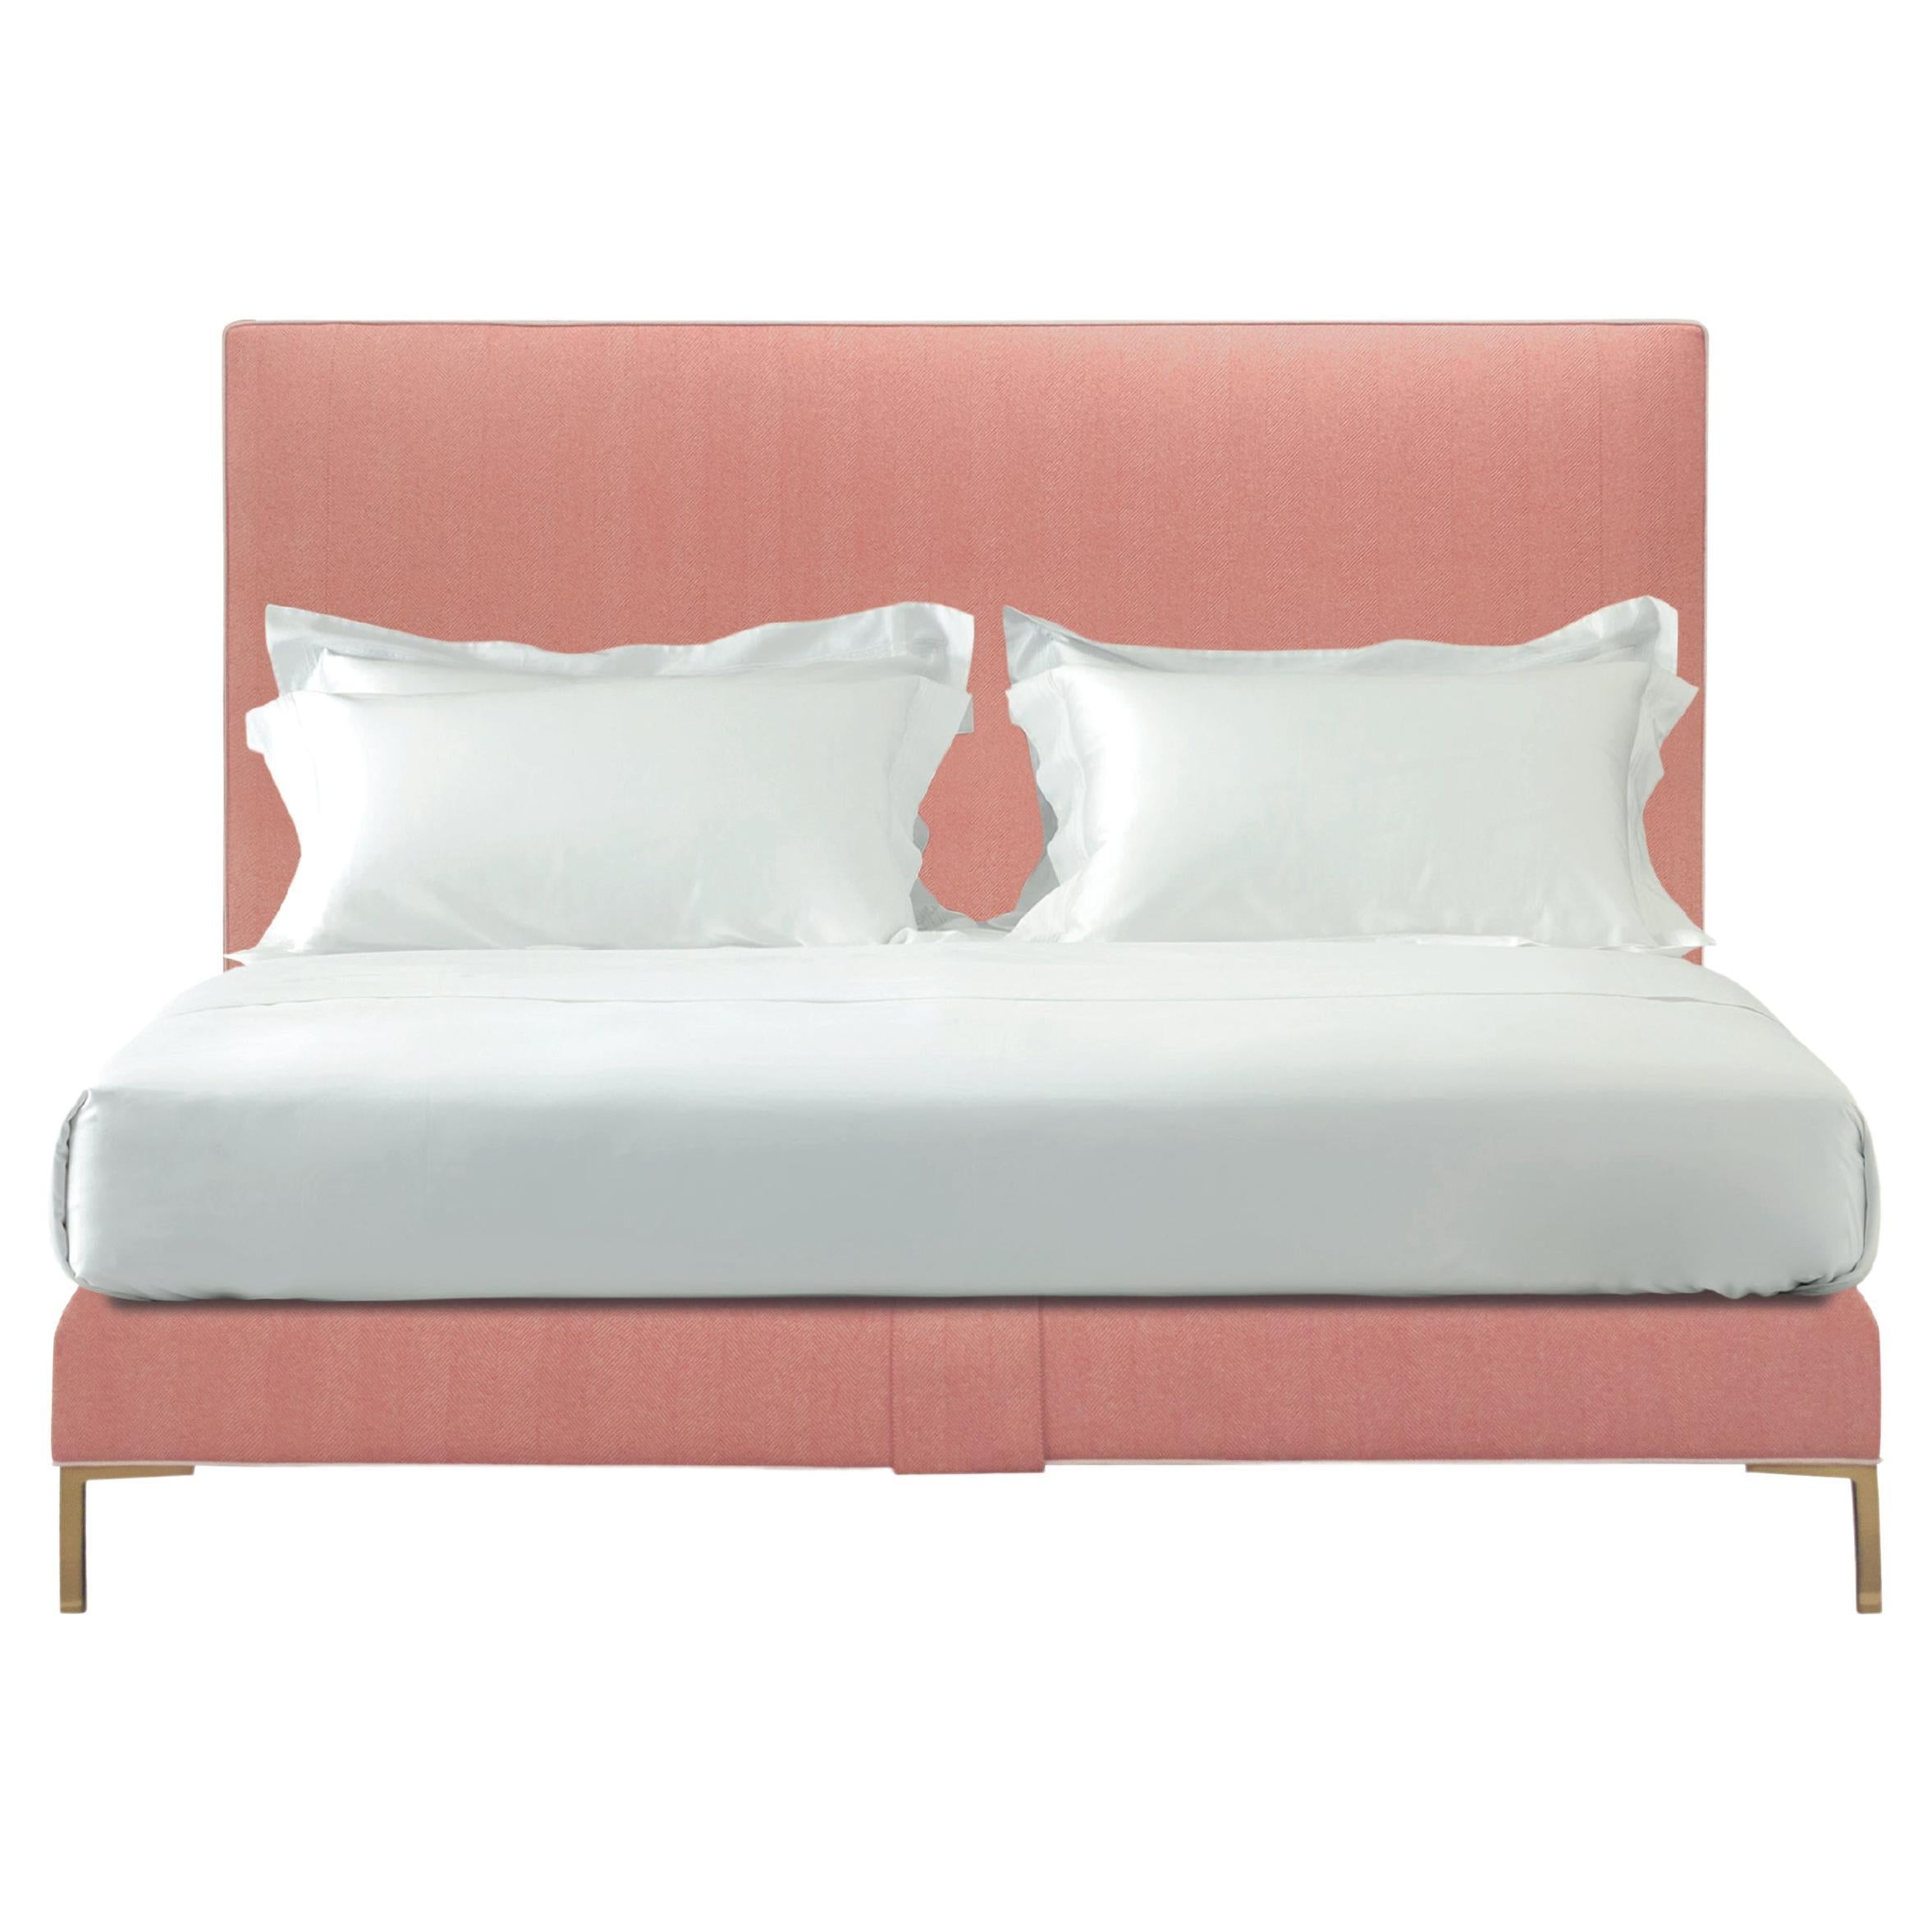 Savoir Harlech Headboard & Nº4 Bed Set, Made to Order, California King Size For Sale